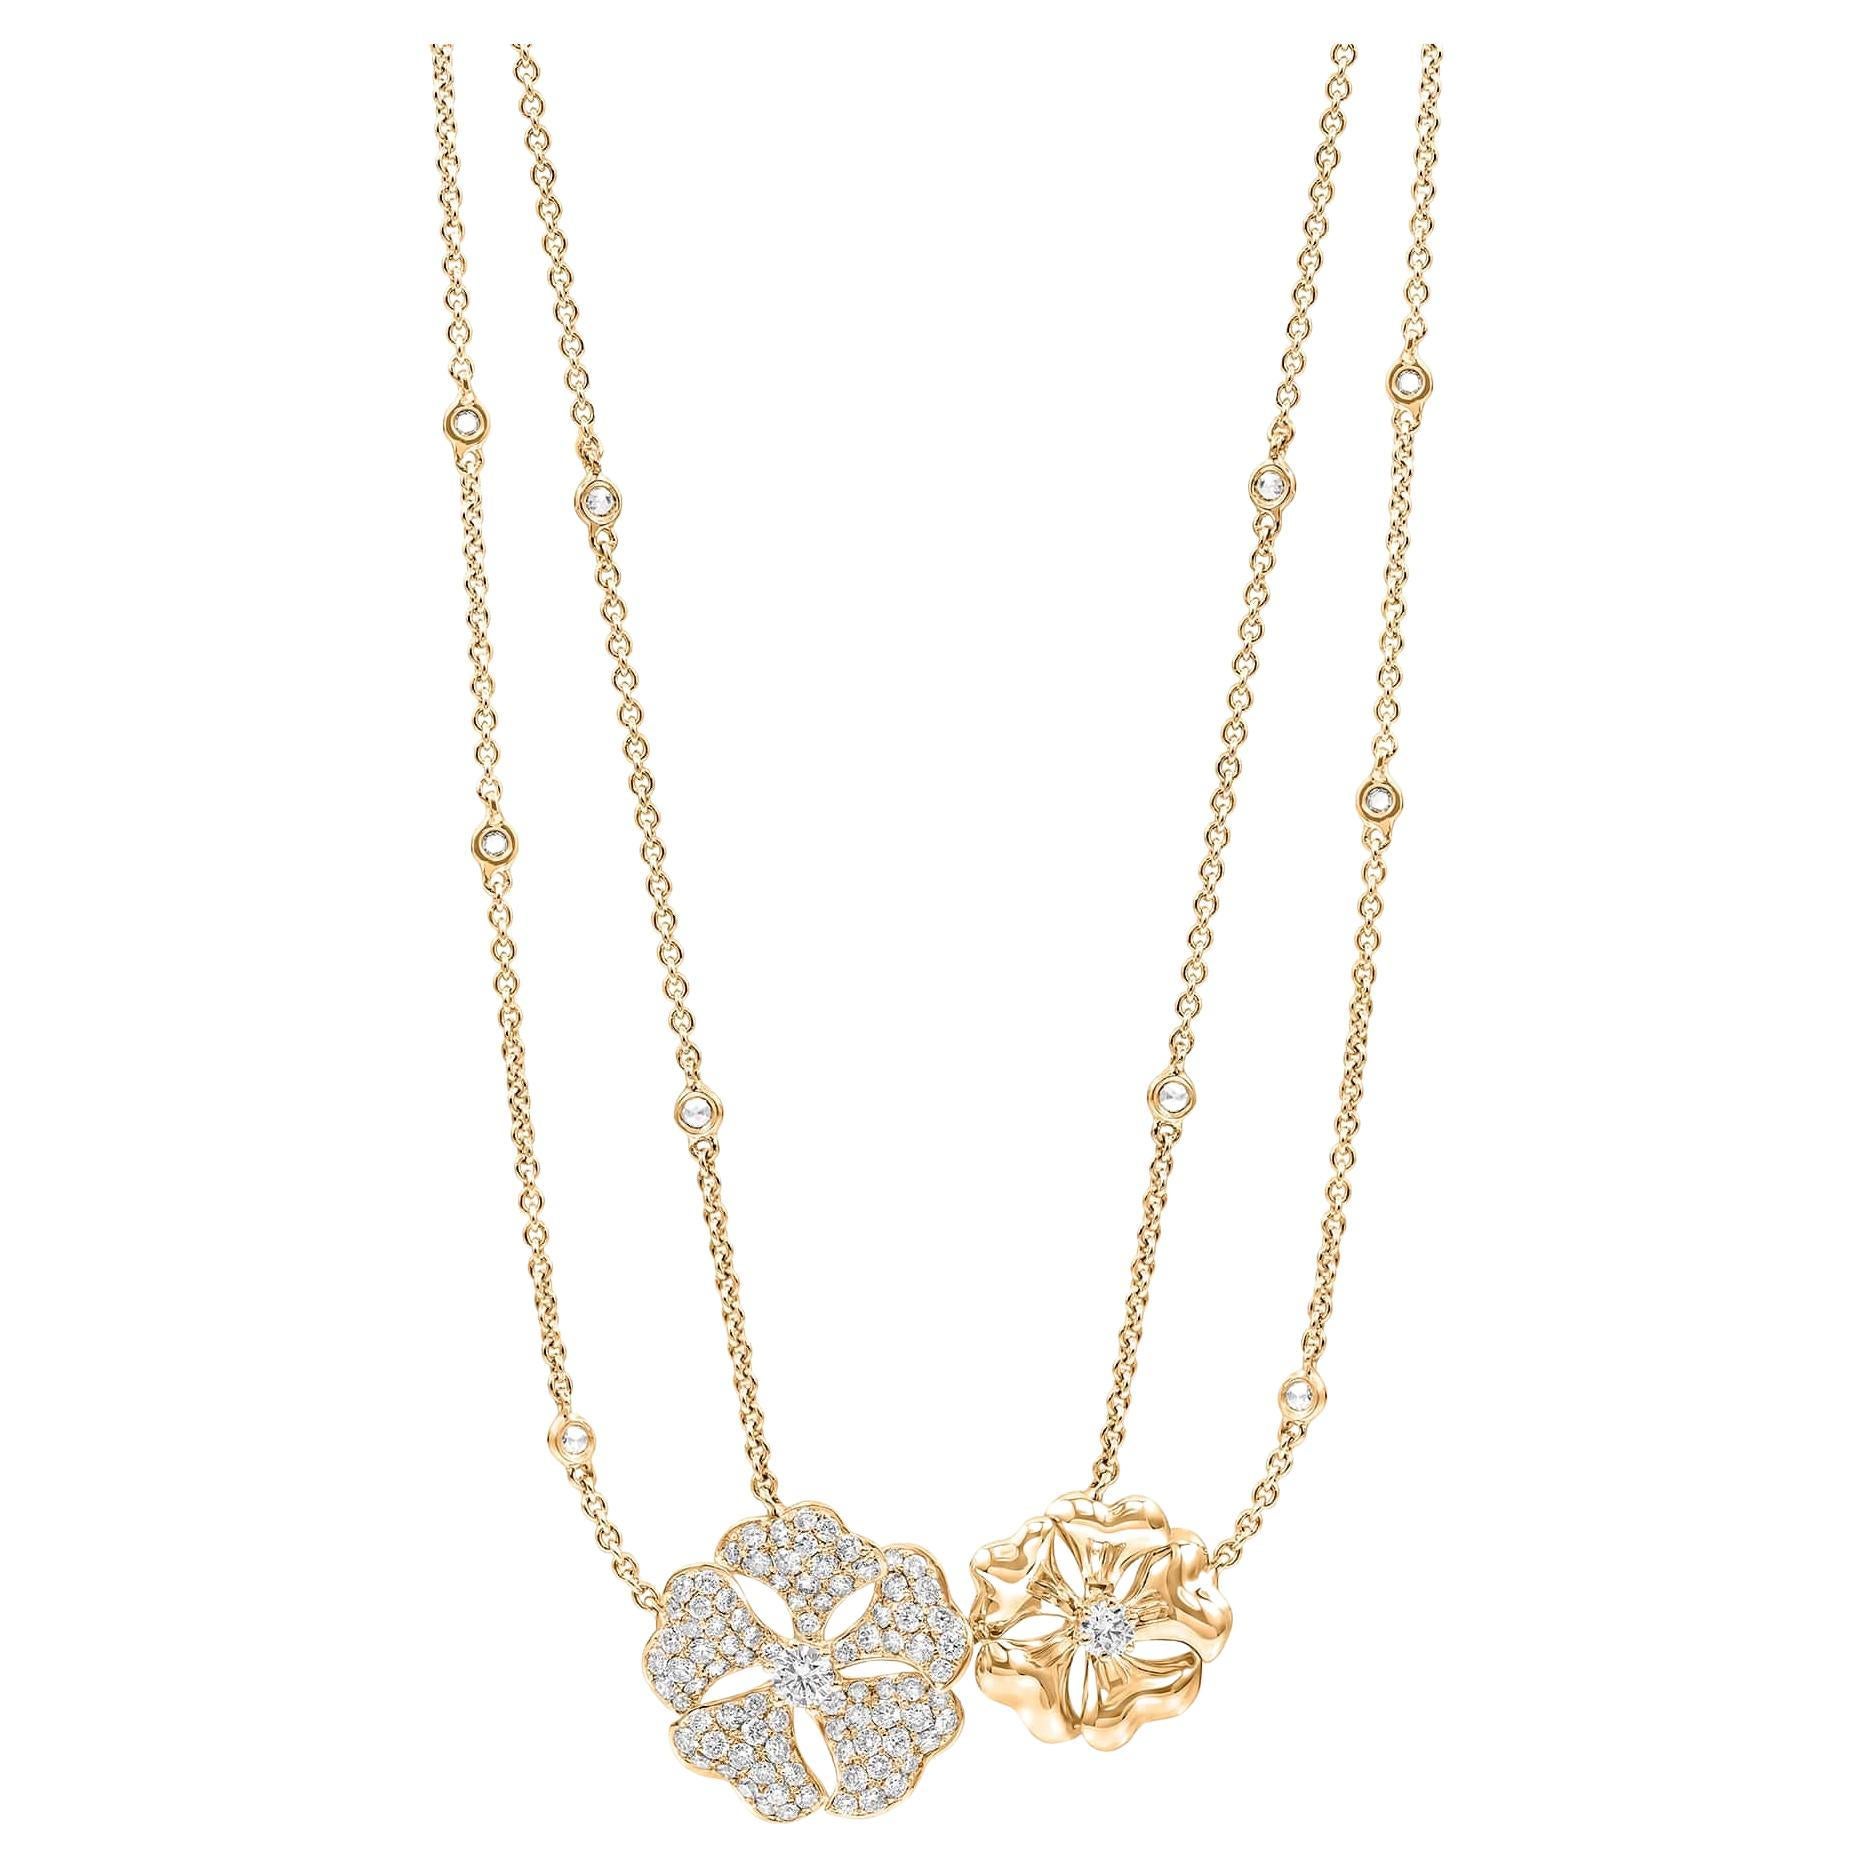 Bloom Diamond Cluster Flower Necklace in 18k Yellow Gold